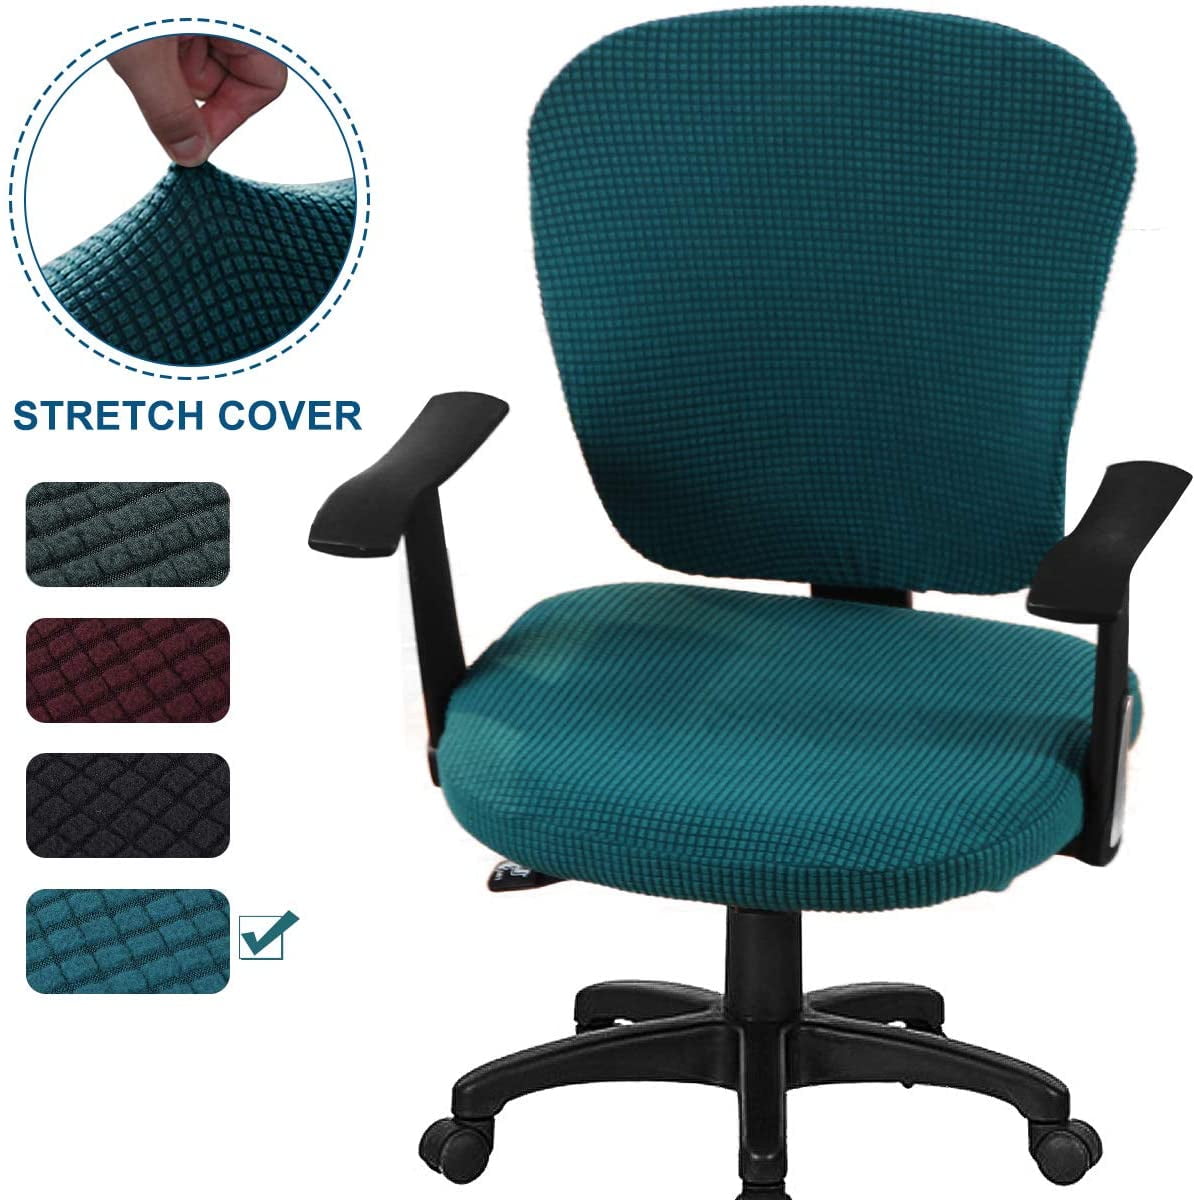 Universal Spandex Stretch Office Chair Swivel Seat Protective Cover Green 